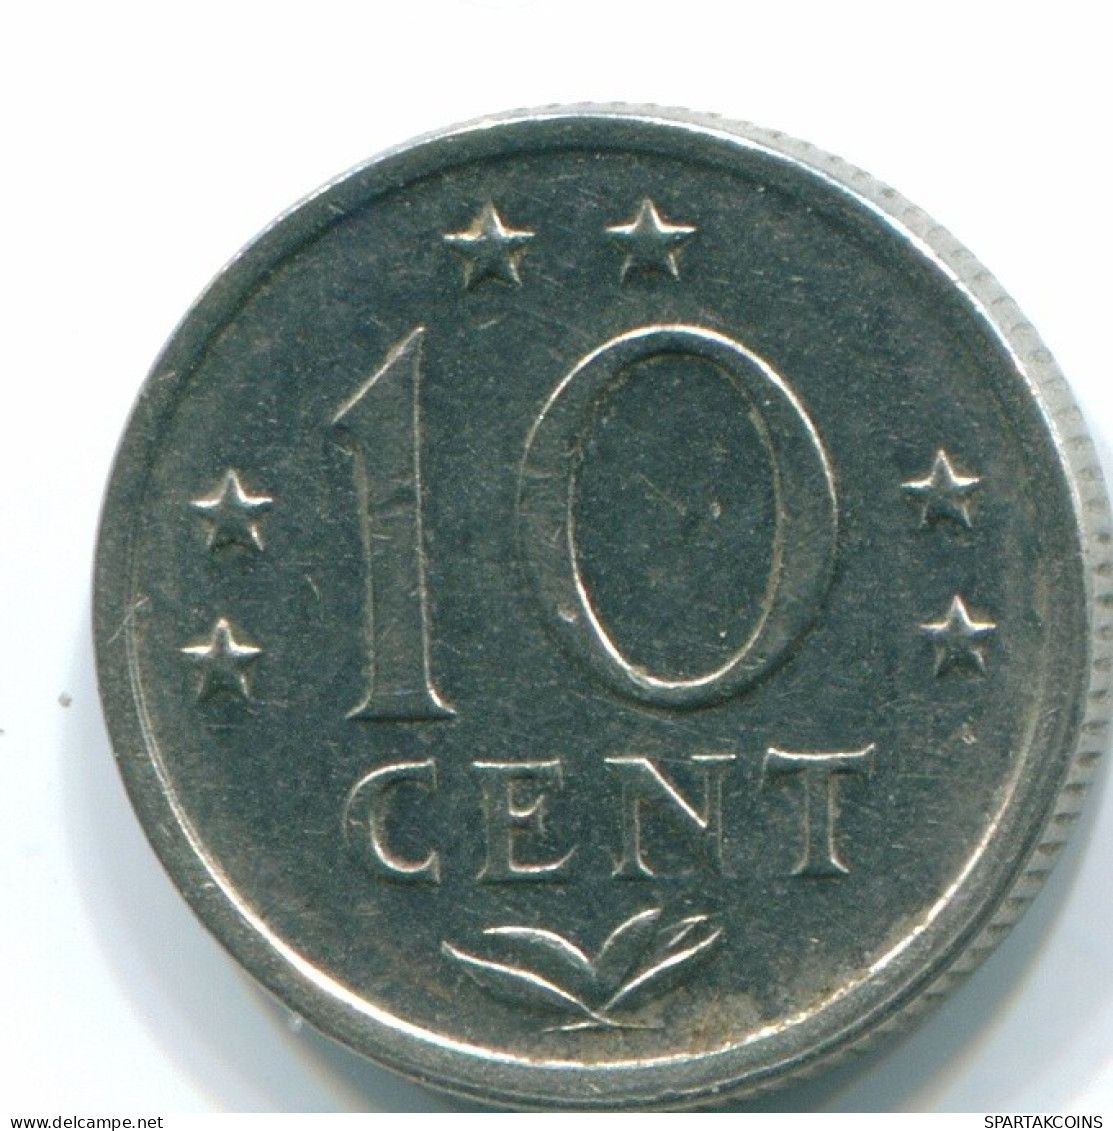 10 CENTS 1971 NETHERLANDS ANTILLES Nickel Colonial Coin #S13480.U.A - Netherlands Antilles